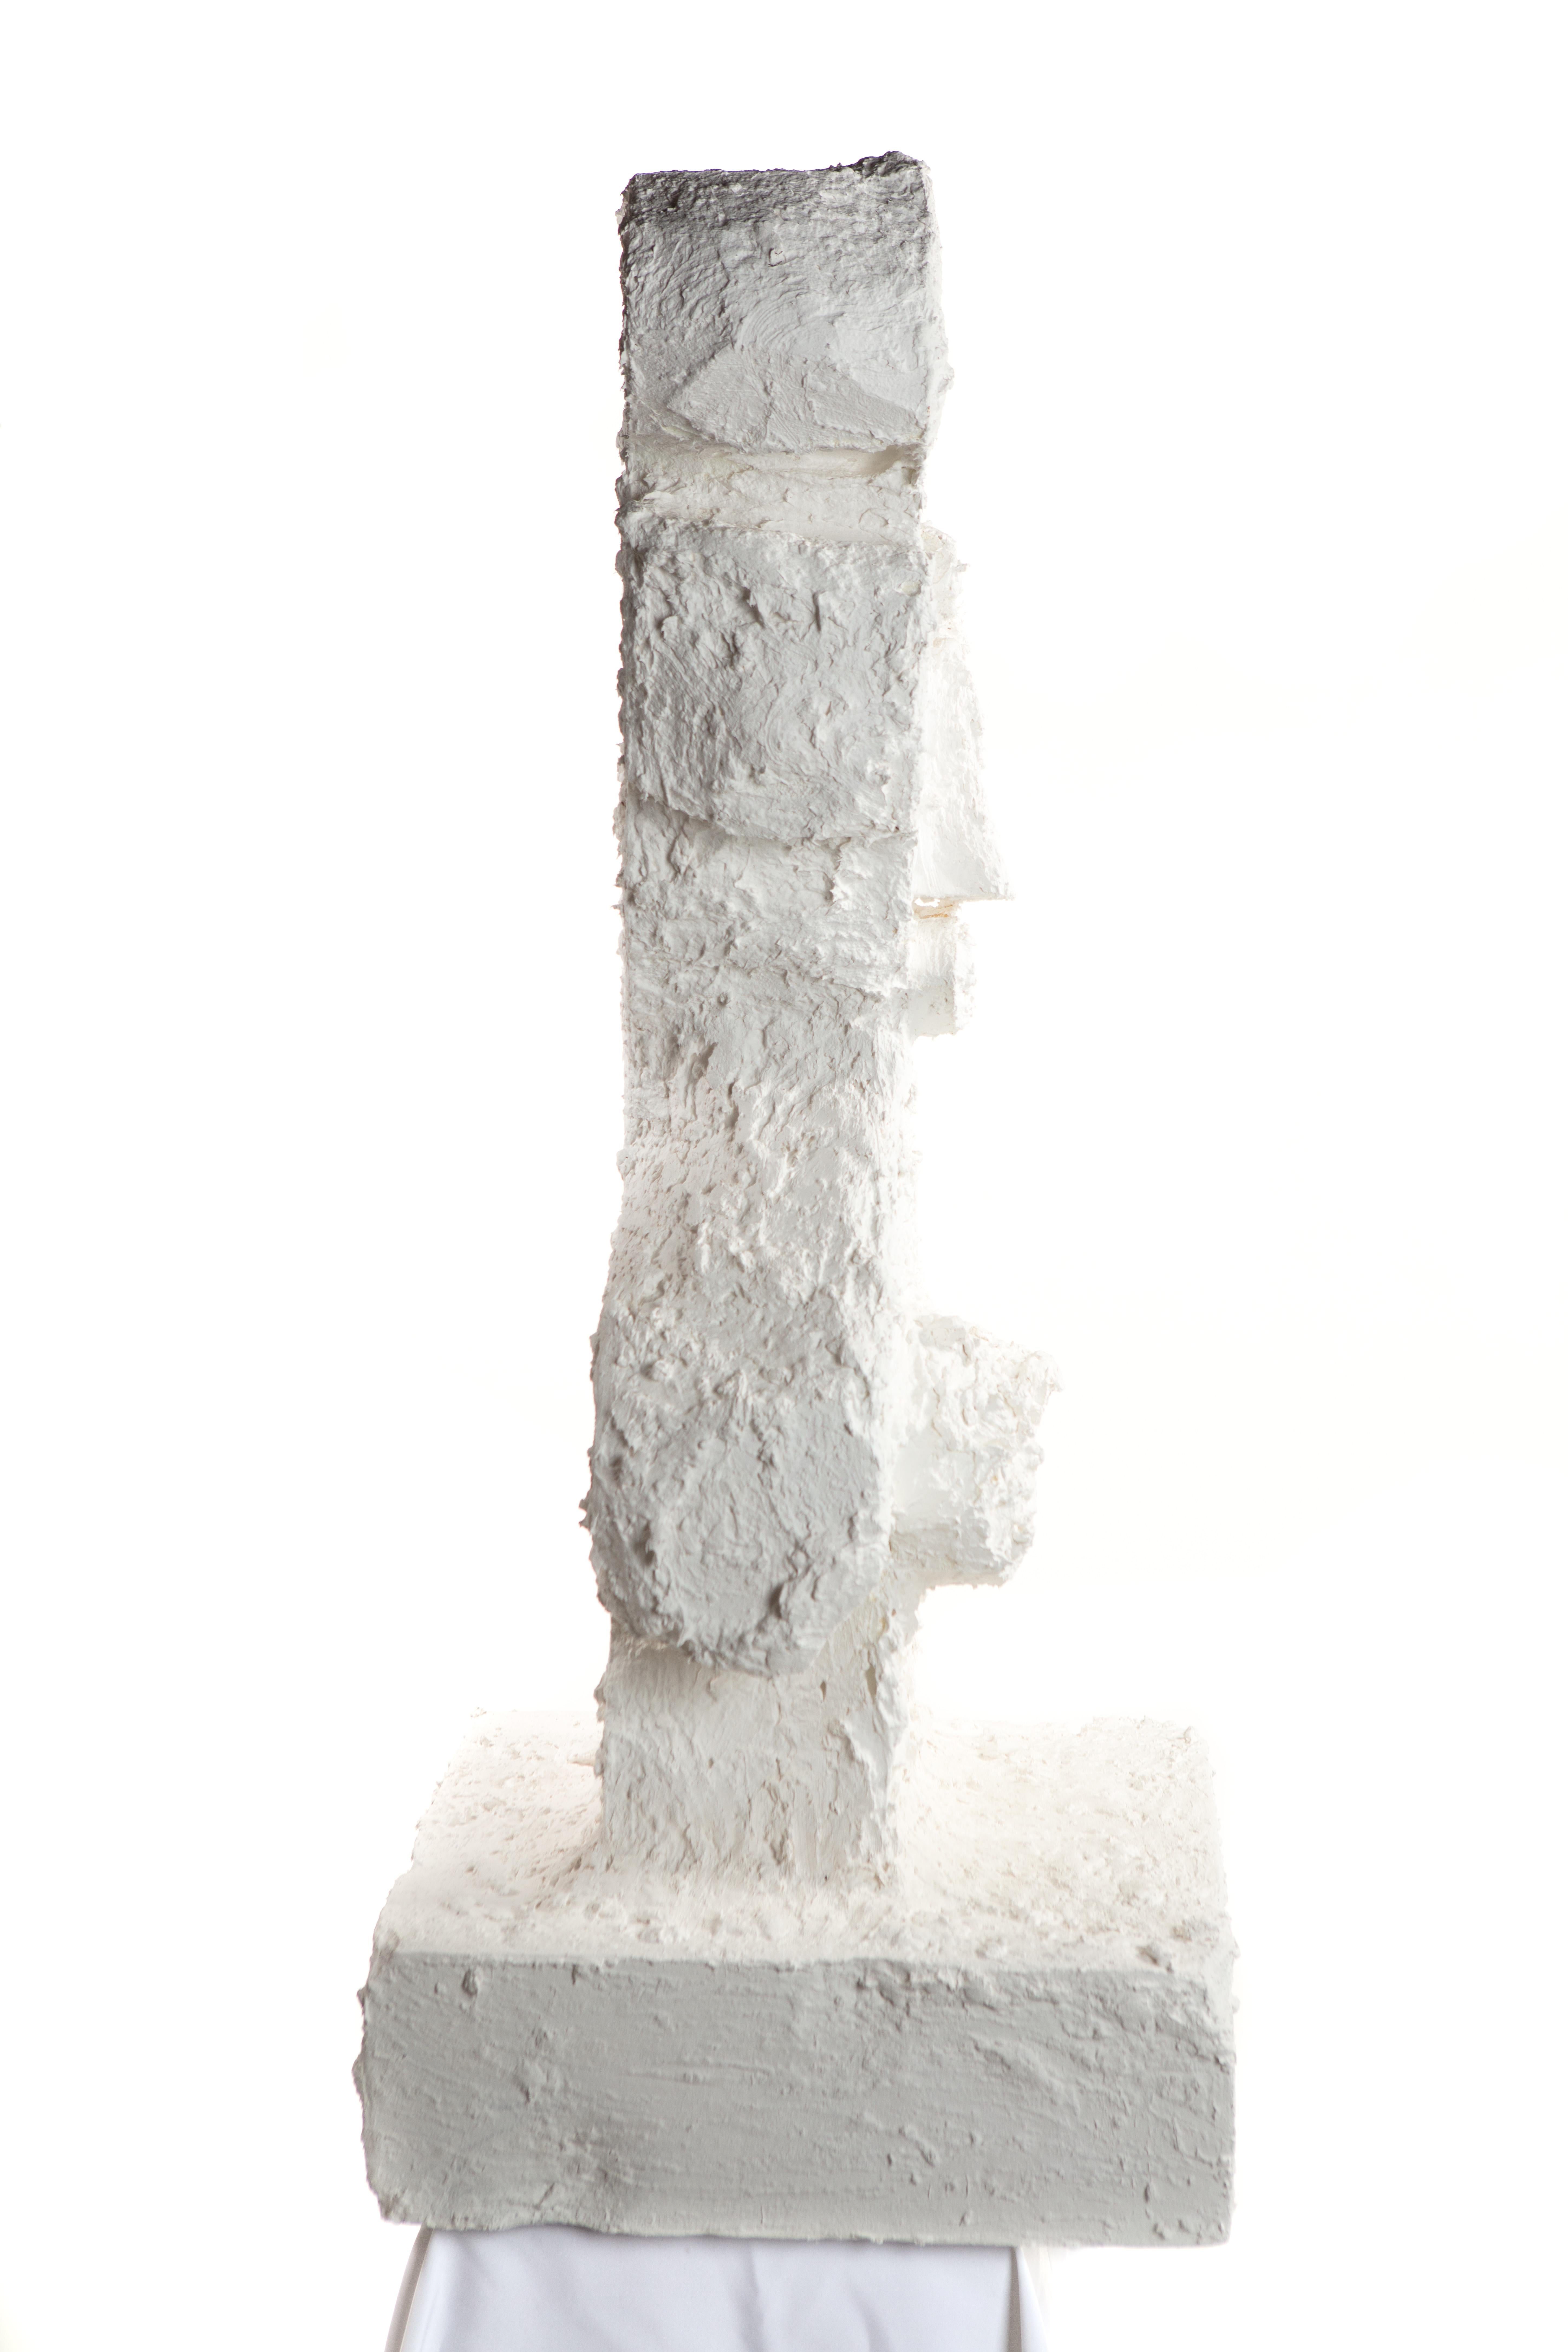 Hand-Crafted White Plaster Sculptural Figure, 21st Century by Mattia Biagi For Sale